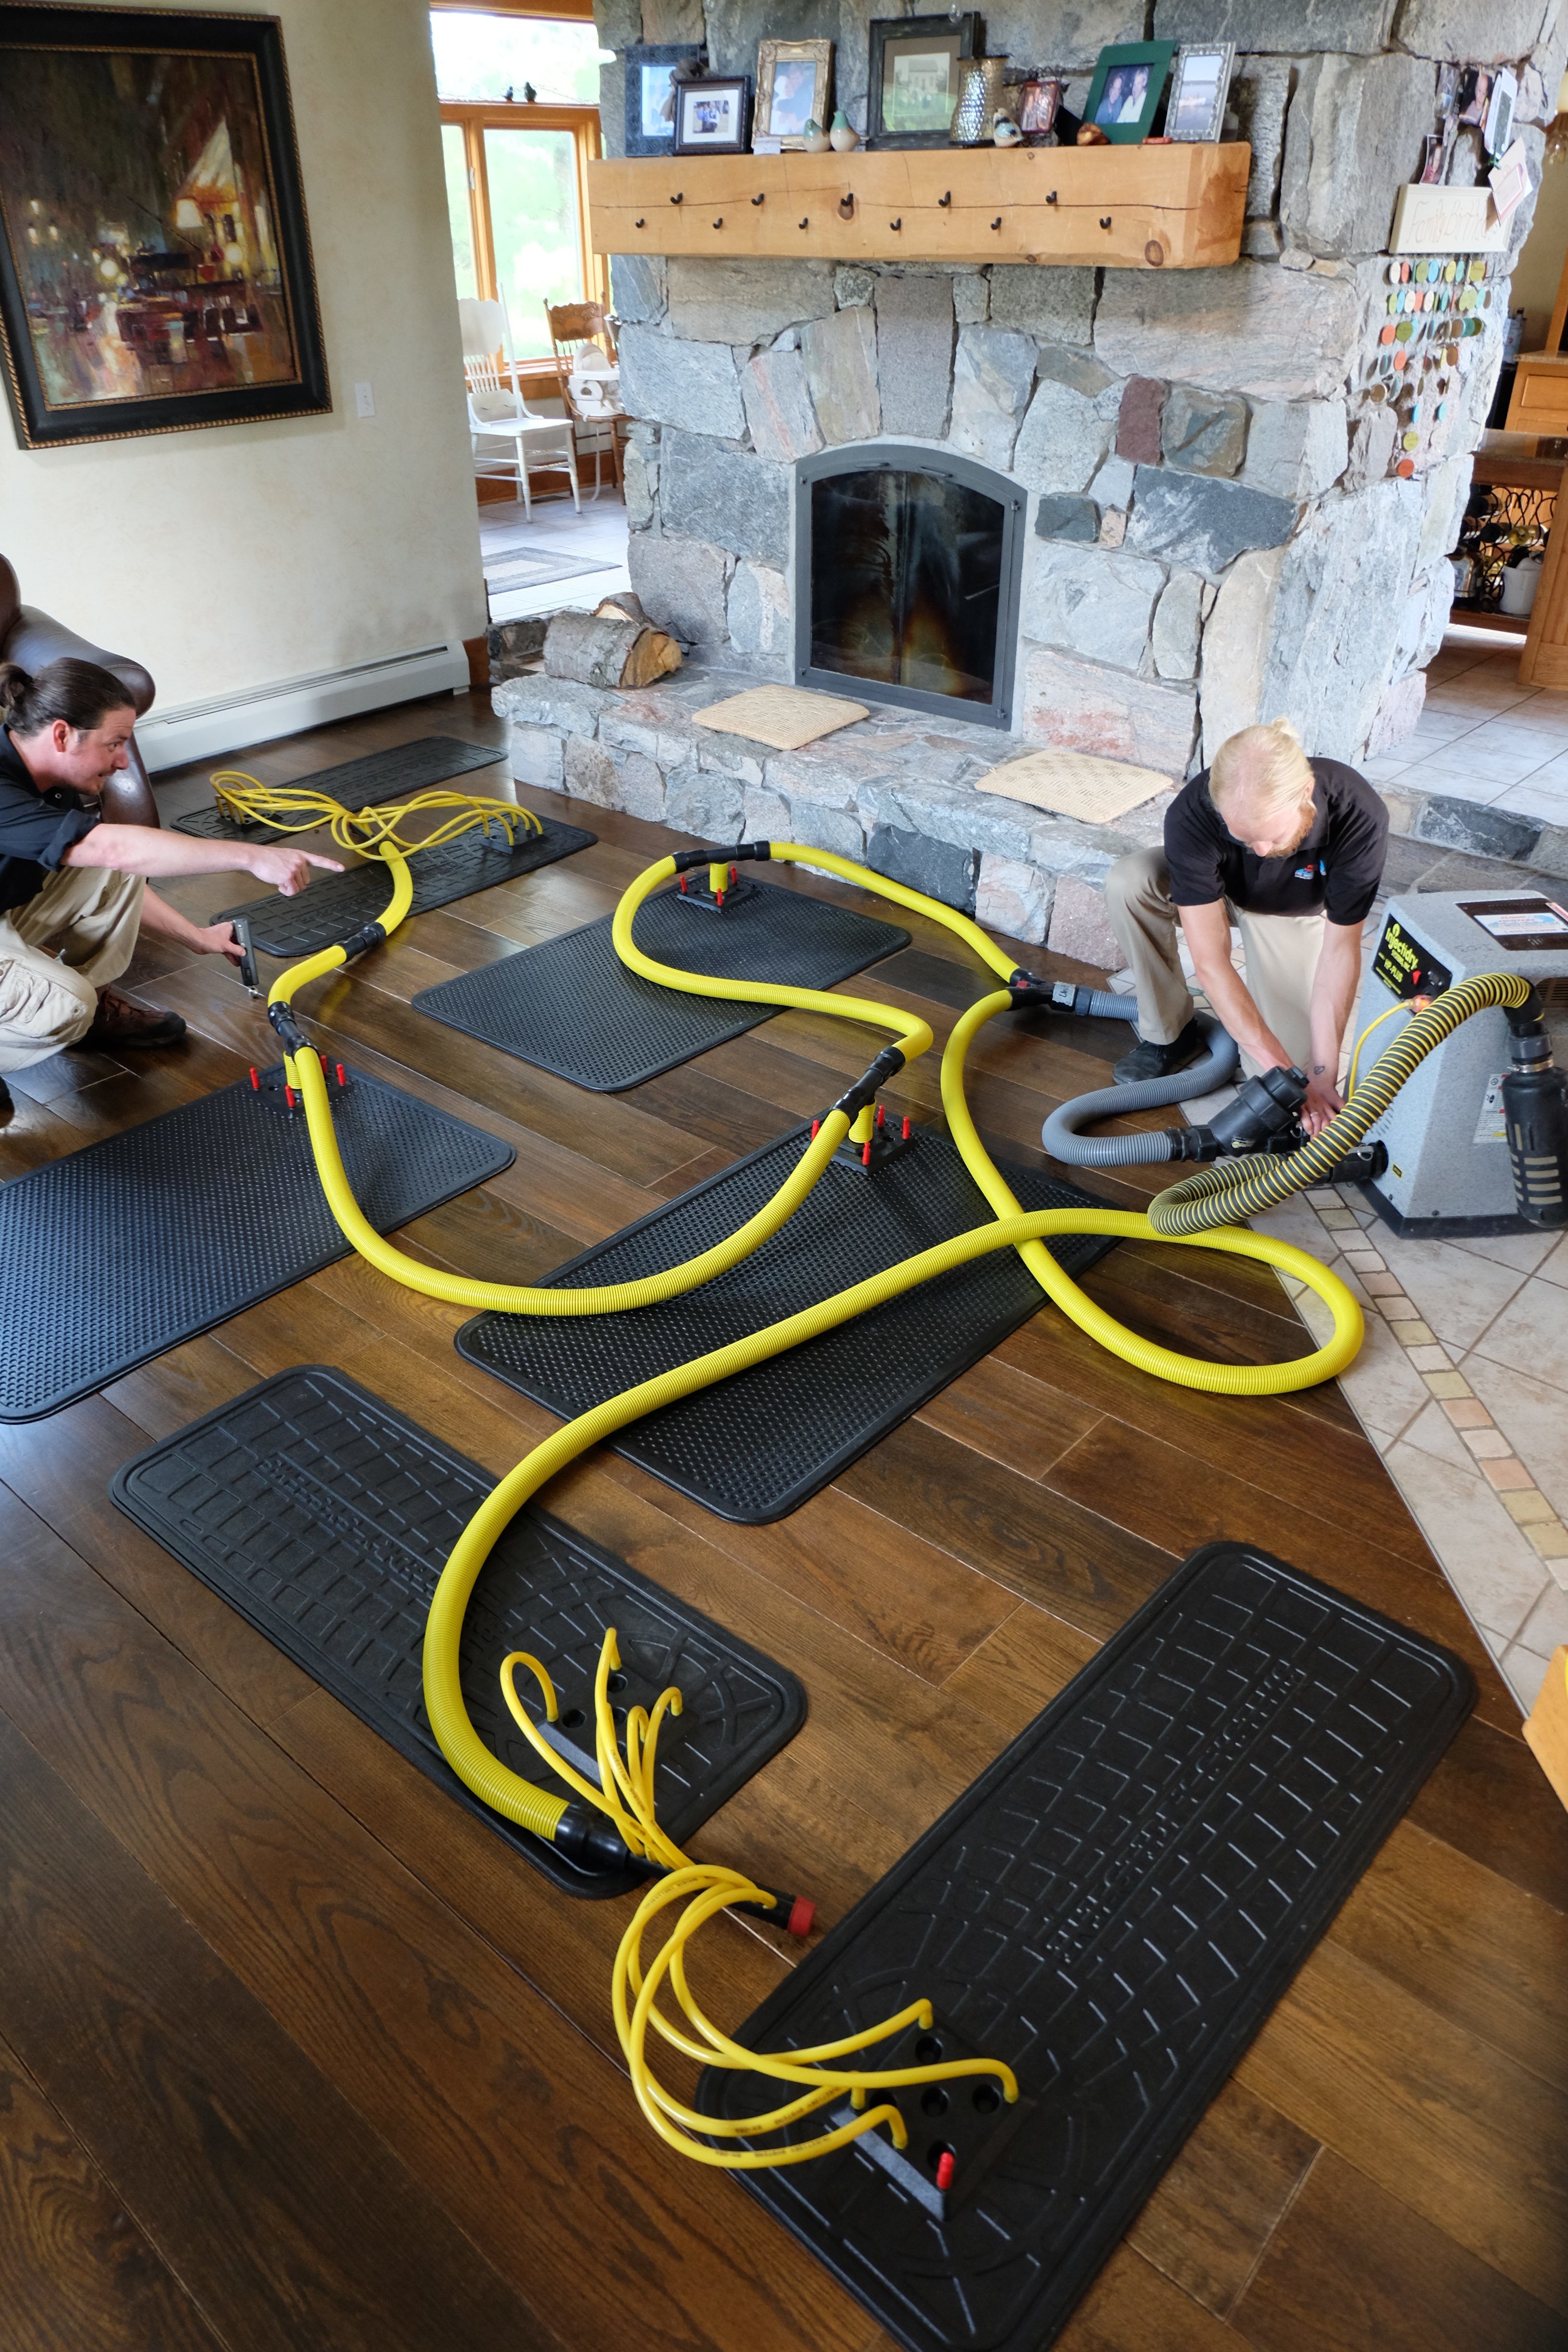 How to Dry Wet Flooring | FloodFighters - Water Damage Restoration